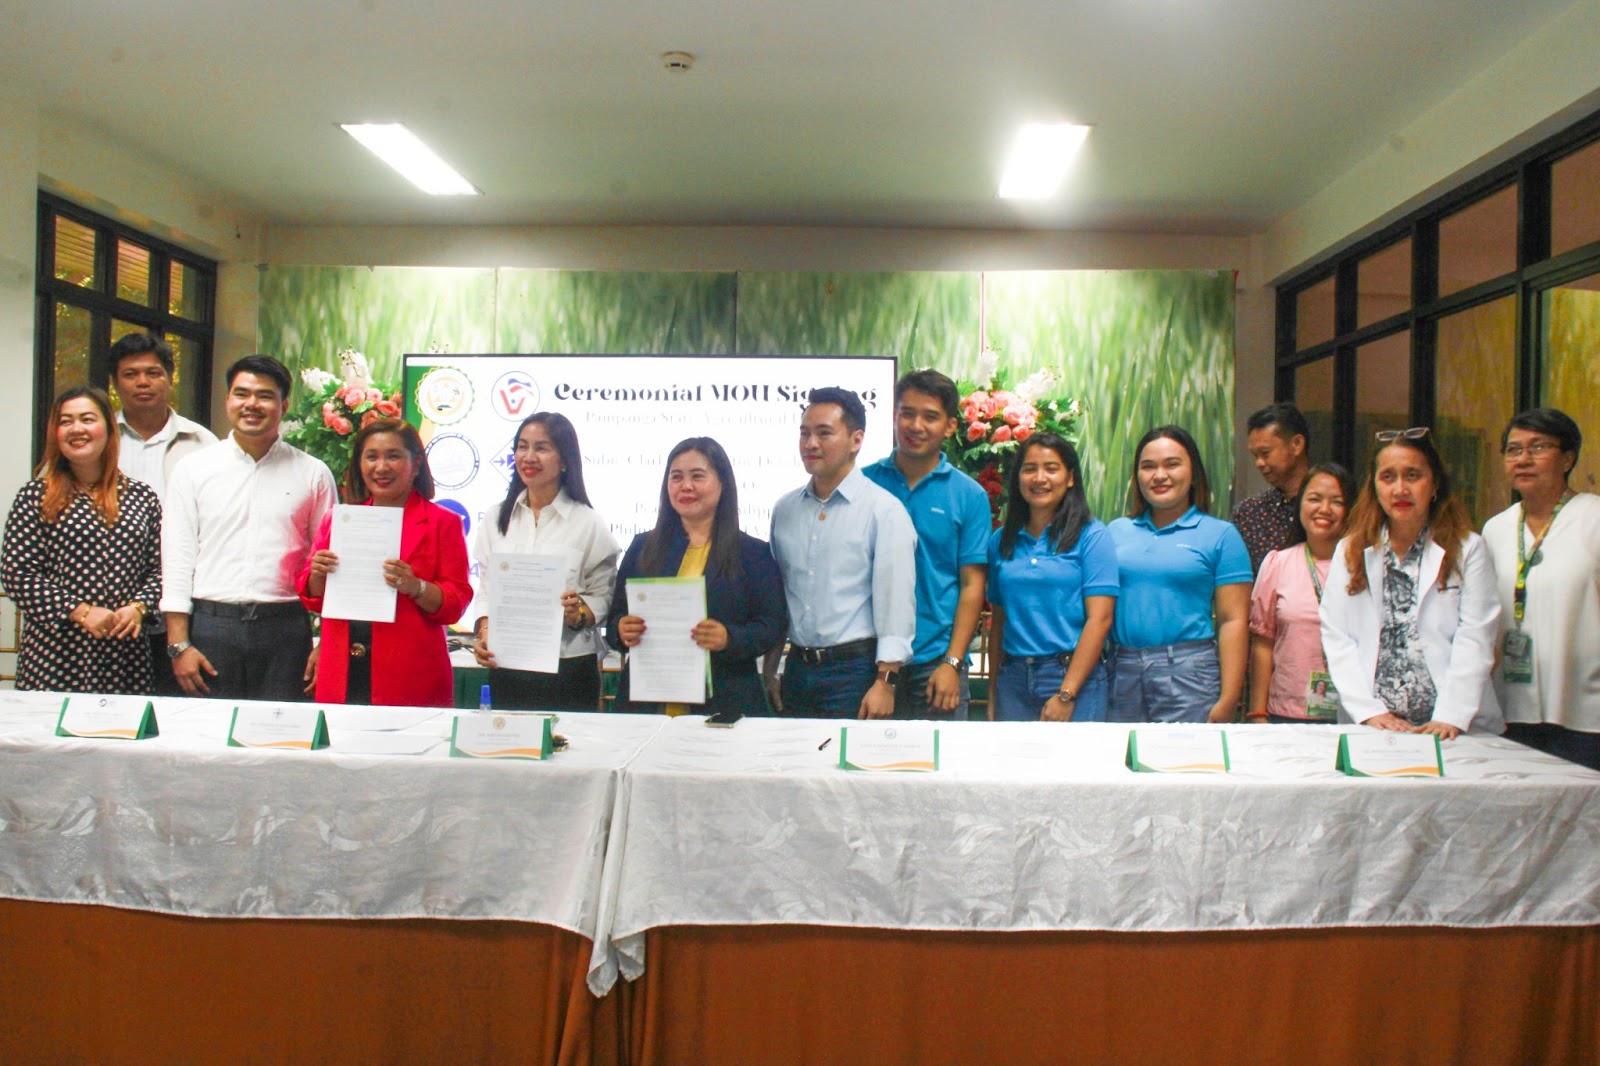 Pilmico Animal Nutrition Corporation and Pampanga State Agricultural University signed a Memorandum of Understanding for future partnerships